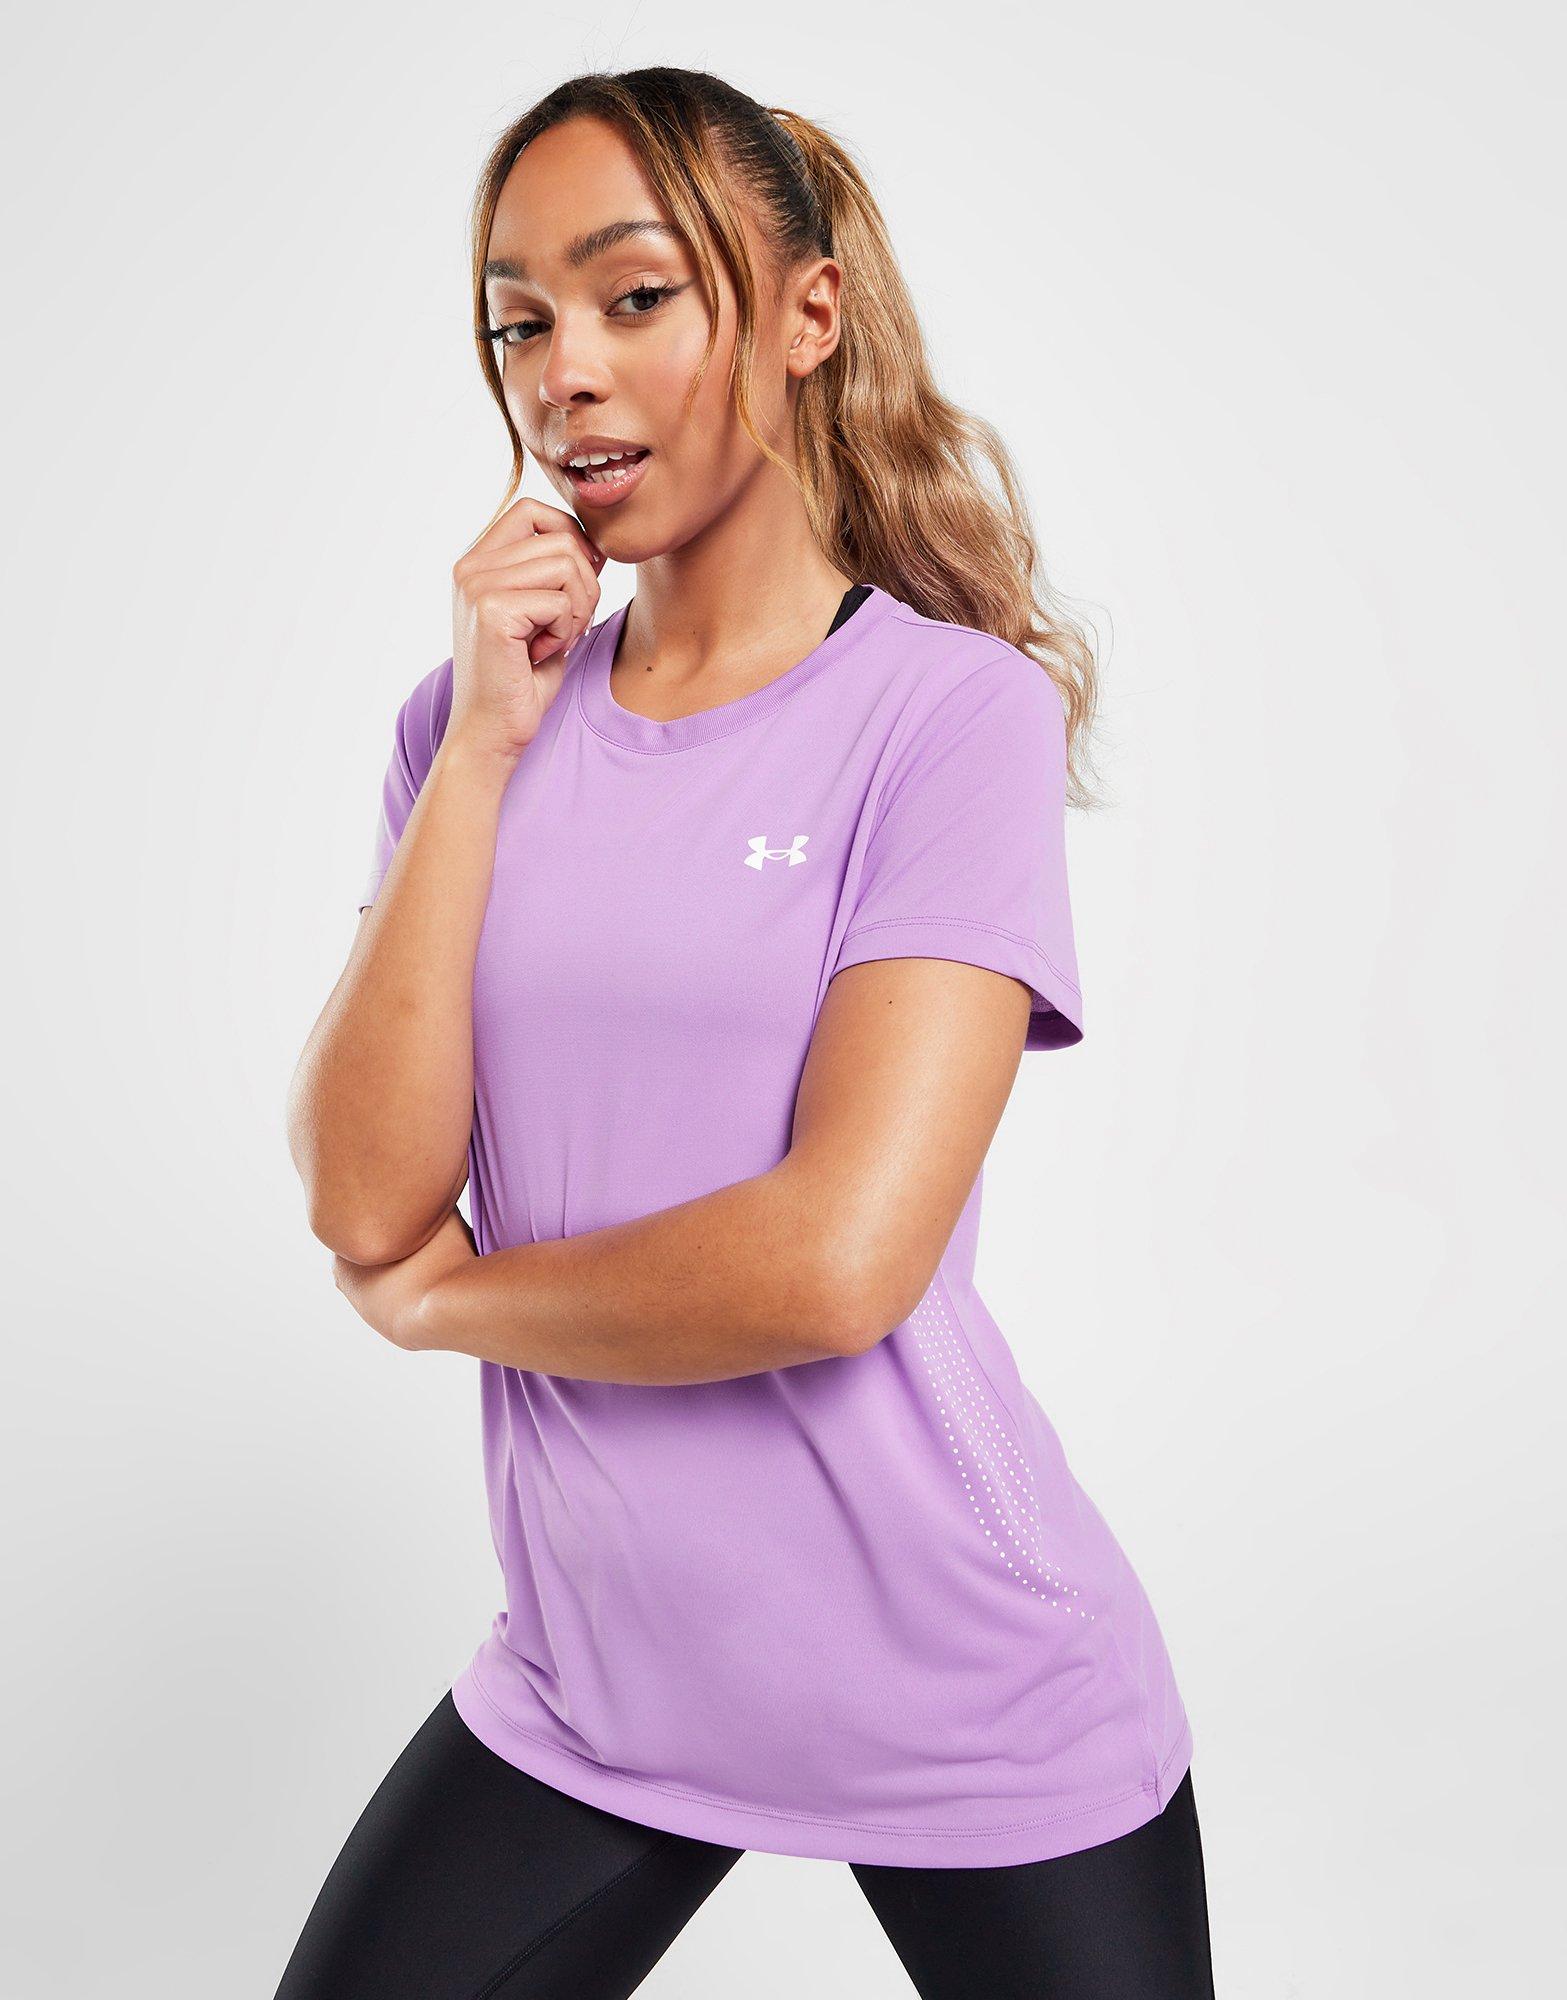 Under Armour Women's XL Fitted All Season Gear Workout Purple Top